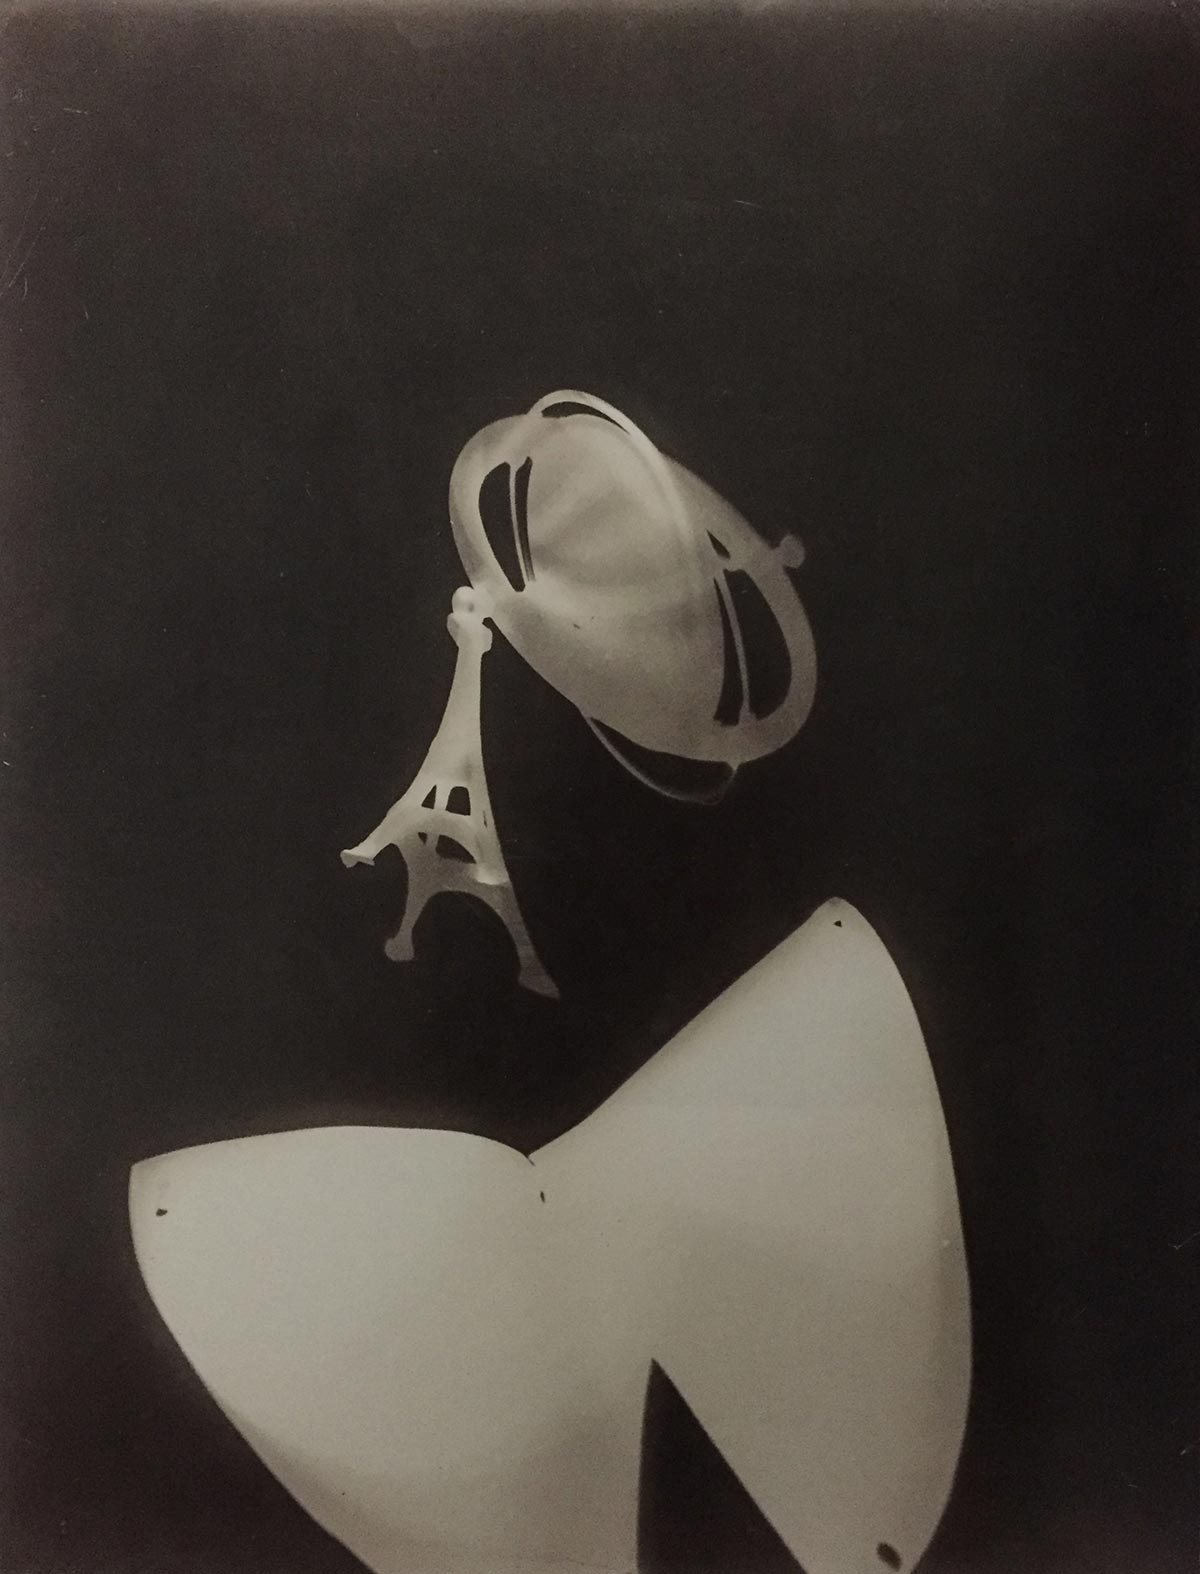 photogram made in 1929